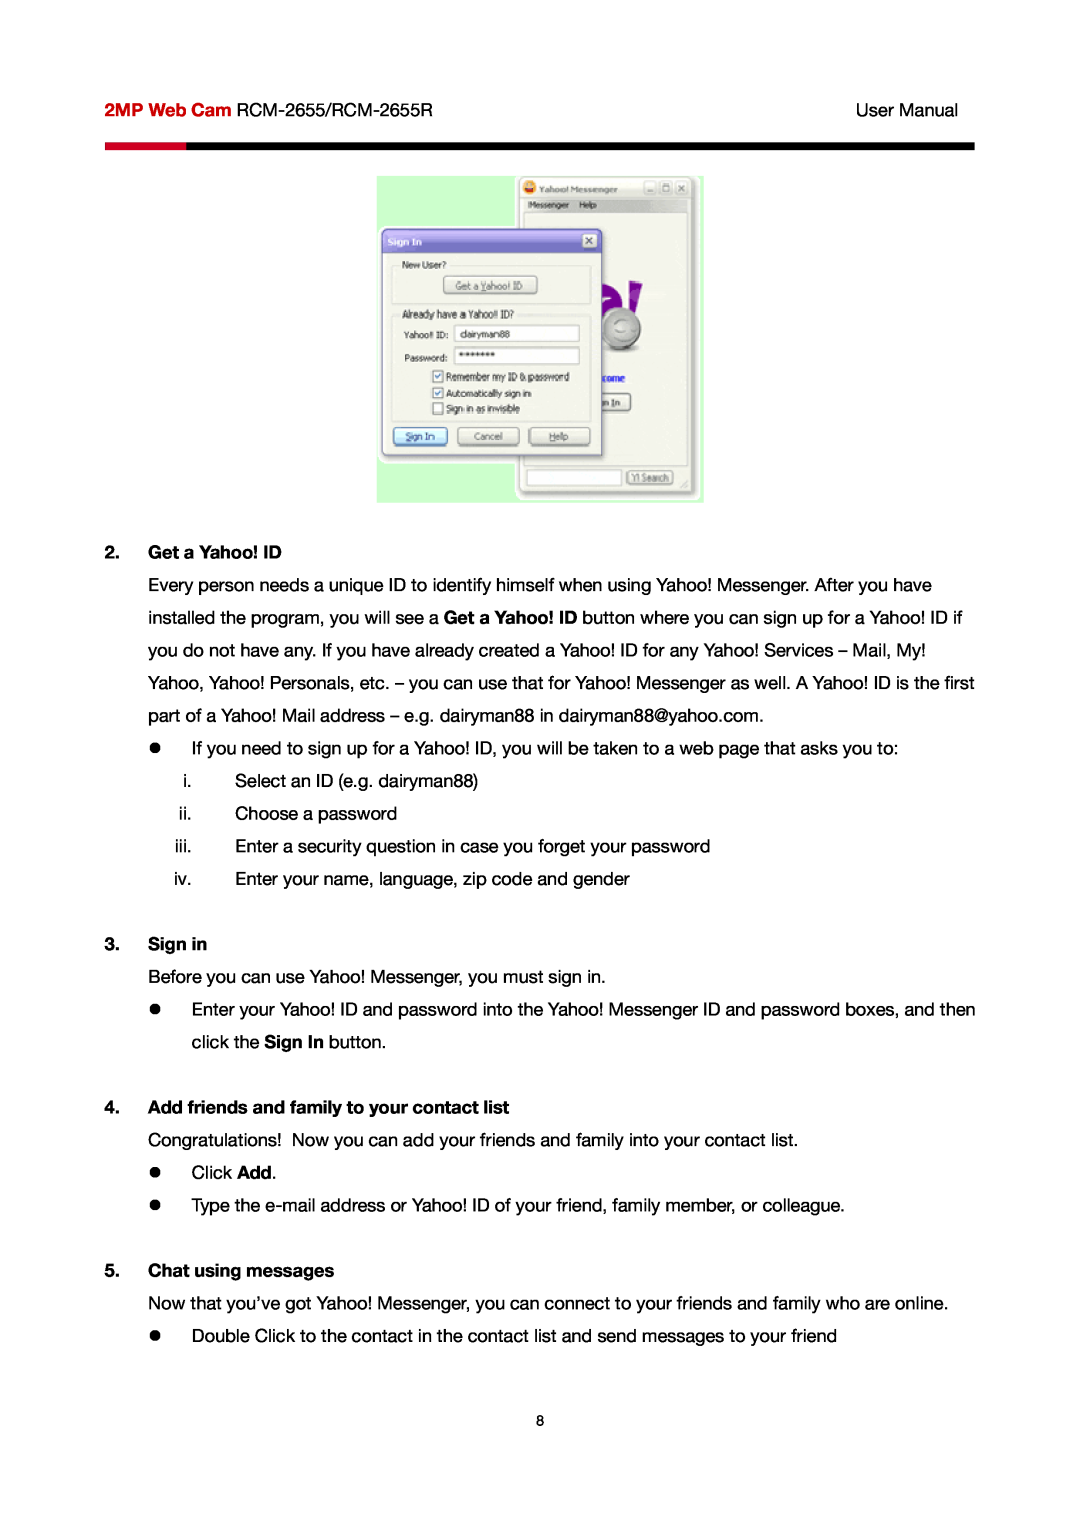 Rosewill RCM-2655R user manual Get a Yahoo! ID, Sign in, Add friends and family to your contact list, Chat using messages 